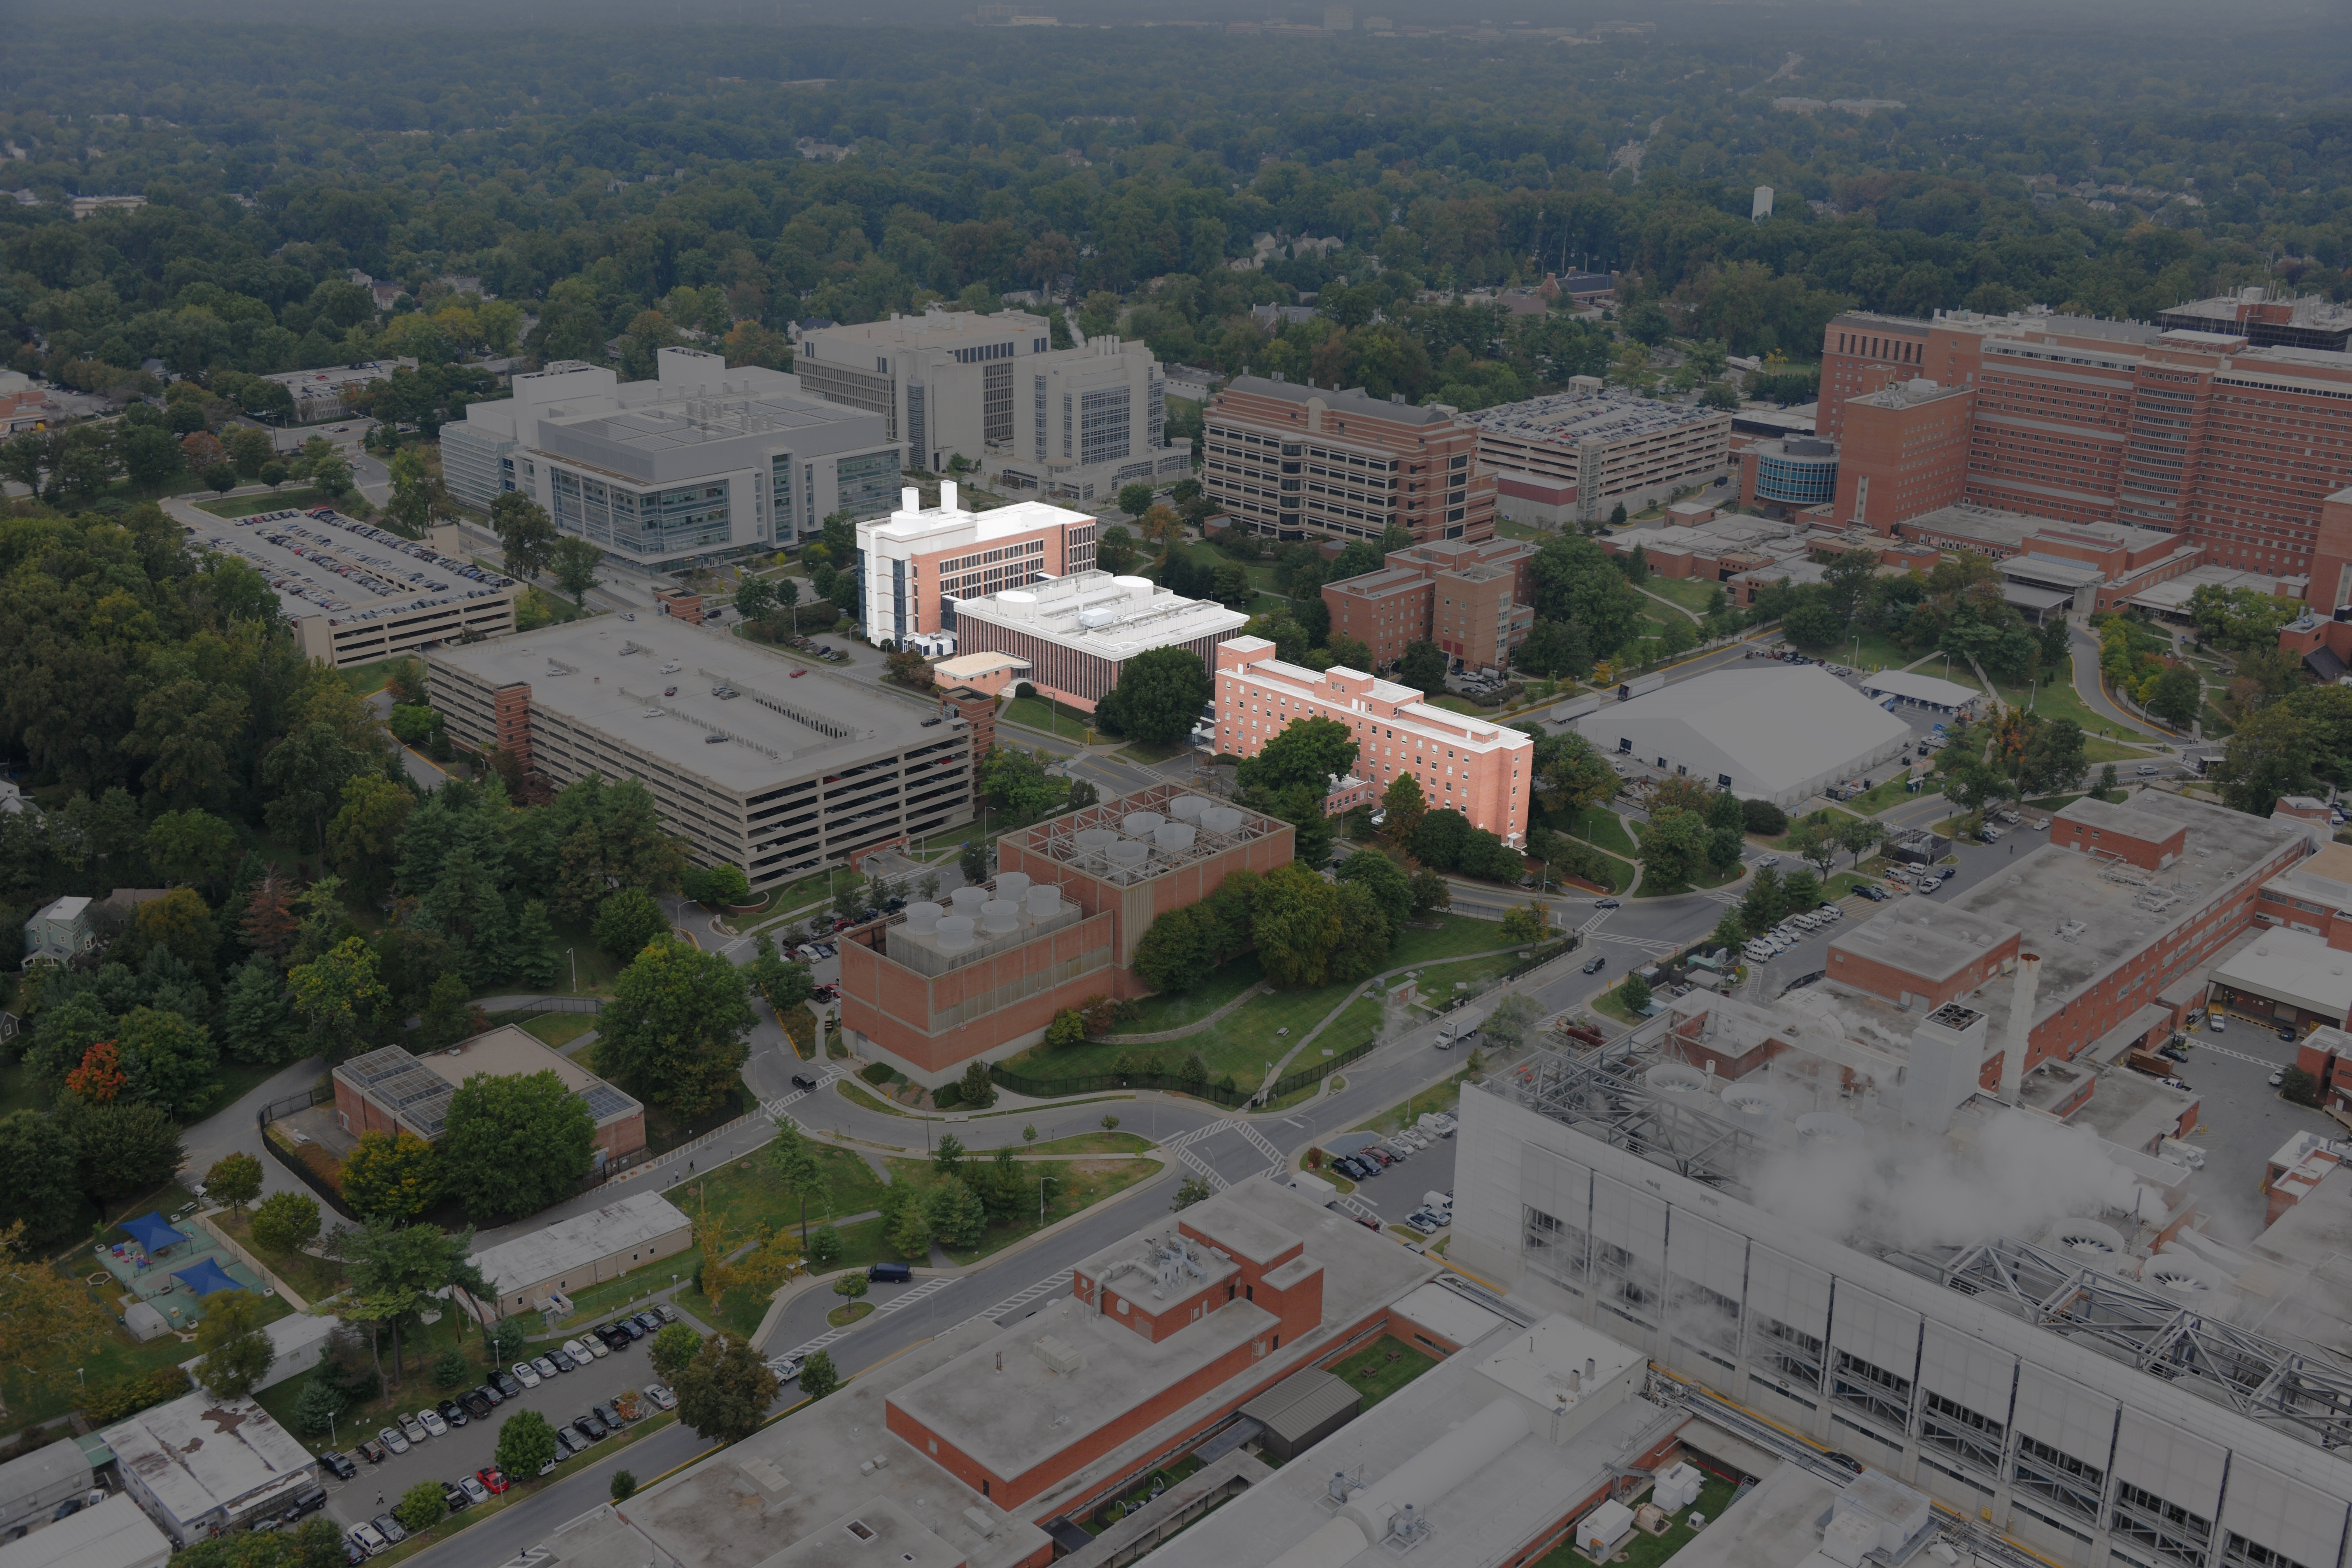 September 2014 aerial image of NIH Bethesda campus with Buildings 29, 29A, and 29B highlighted